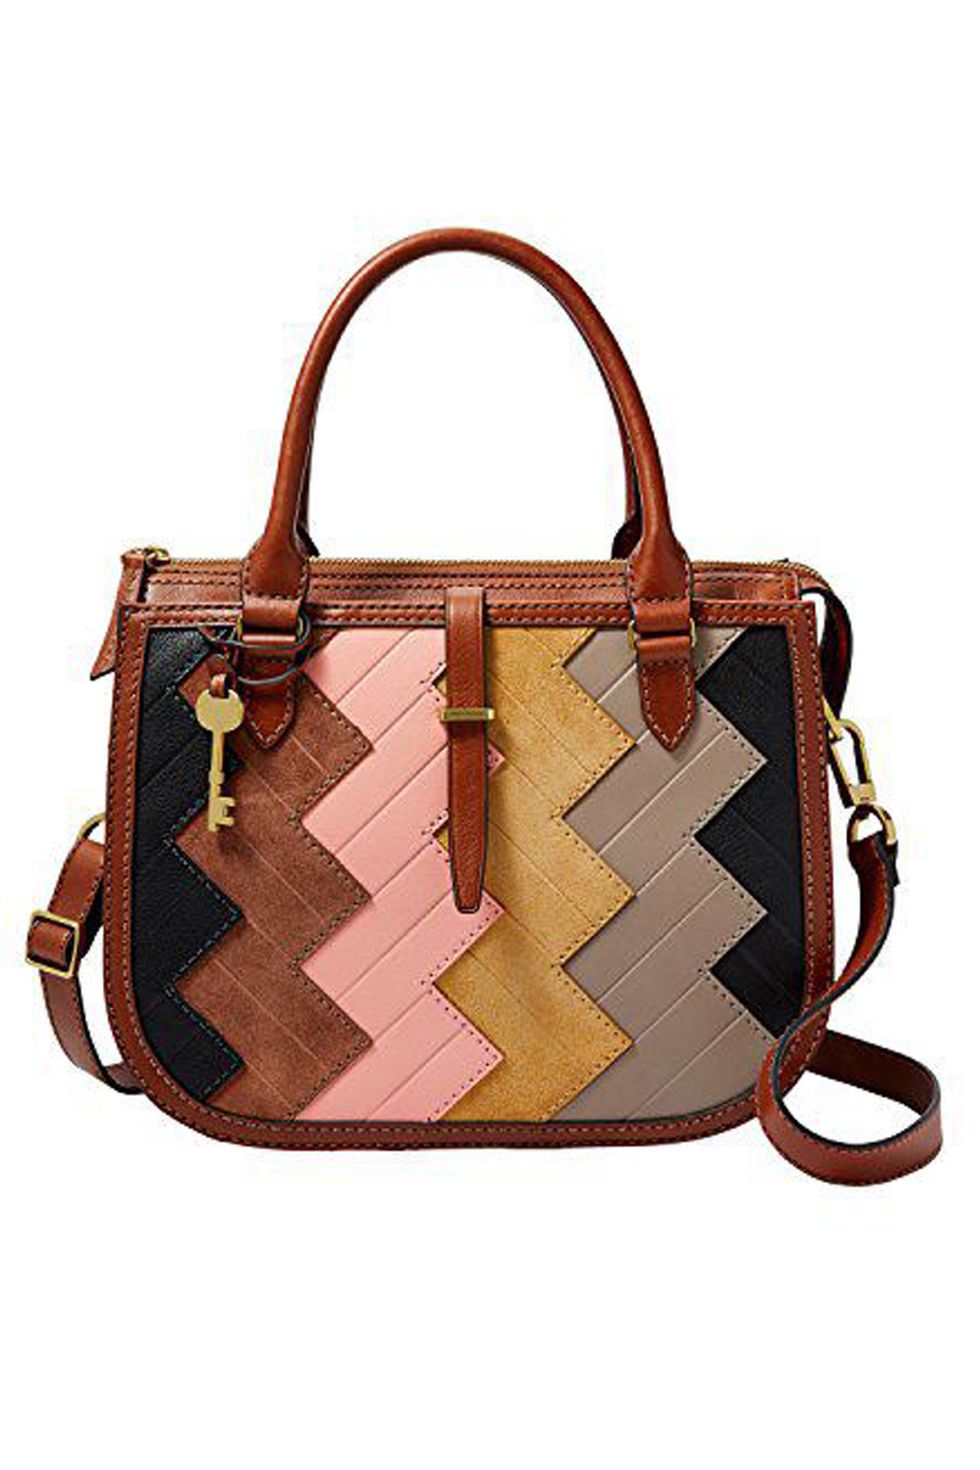 A Multicolored Patchwork Bag You'll Bring Everywhere